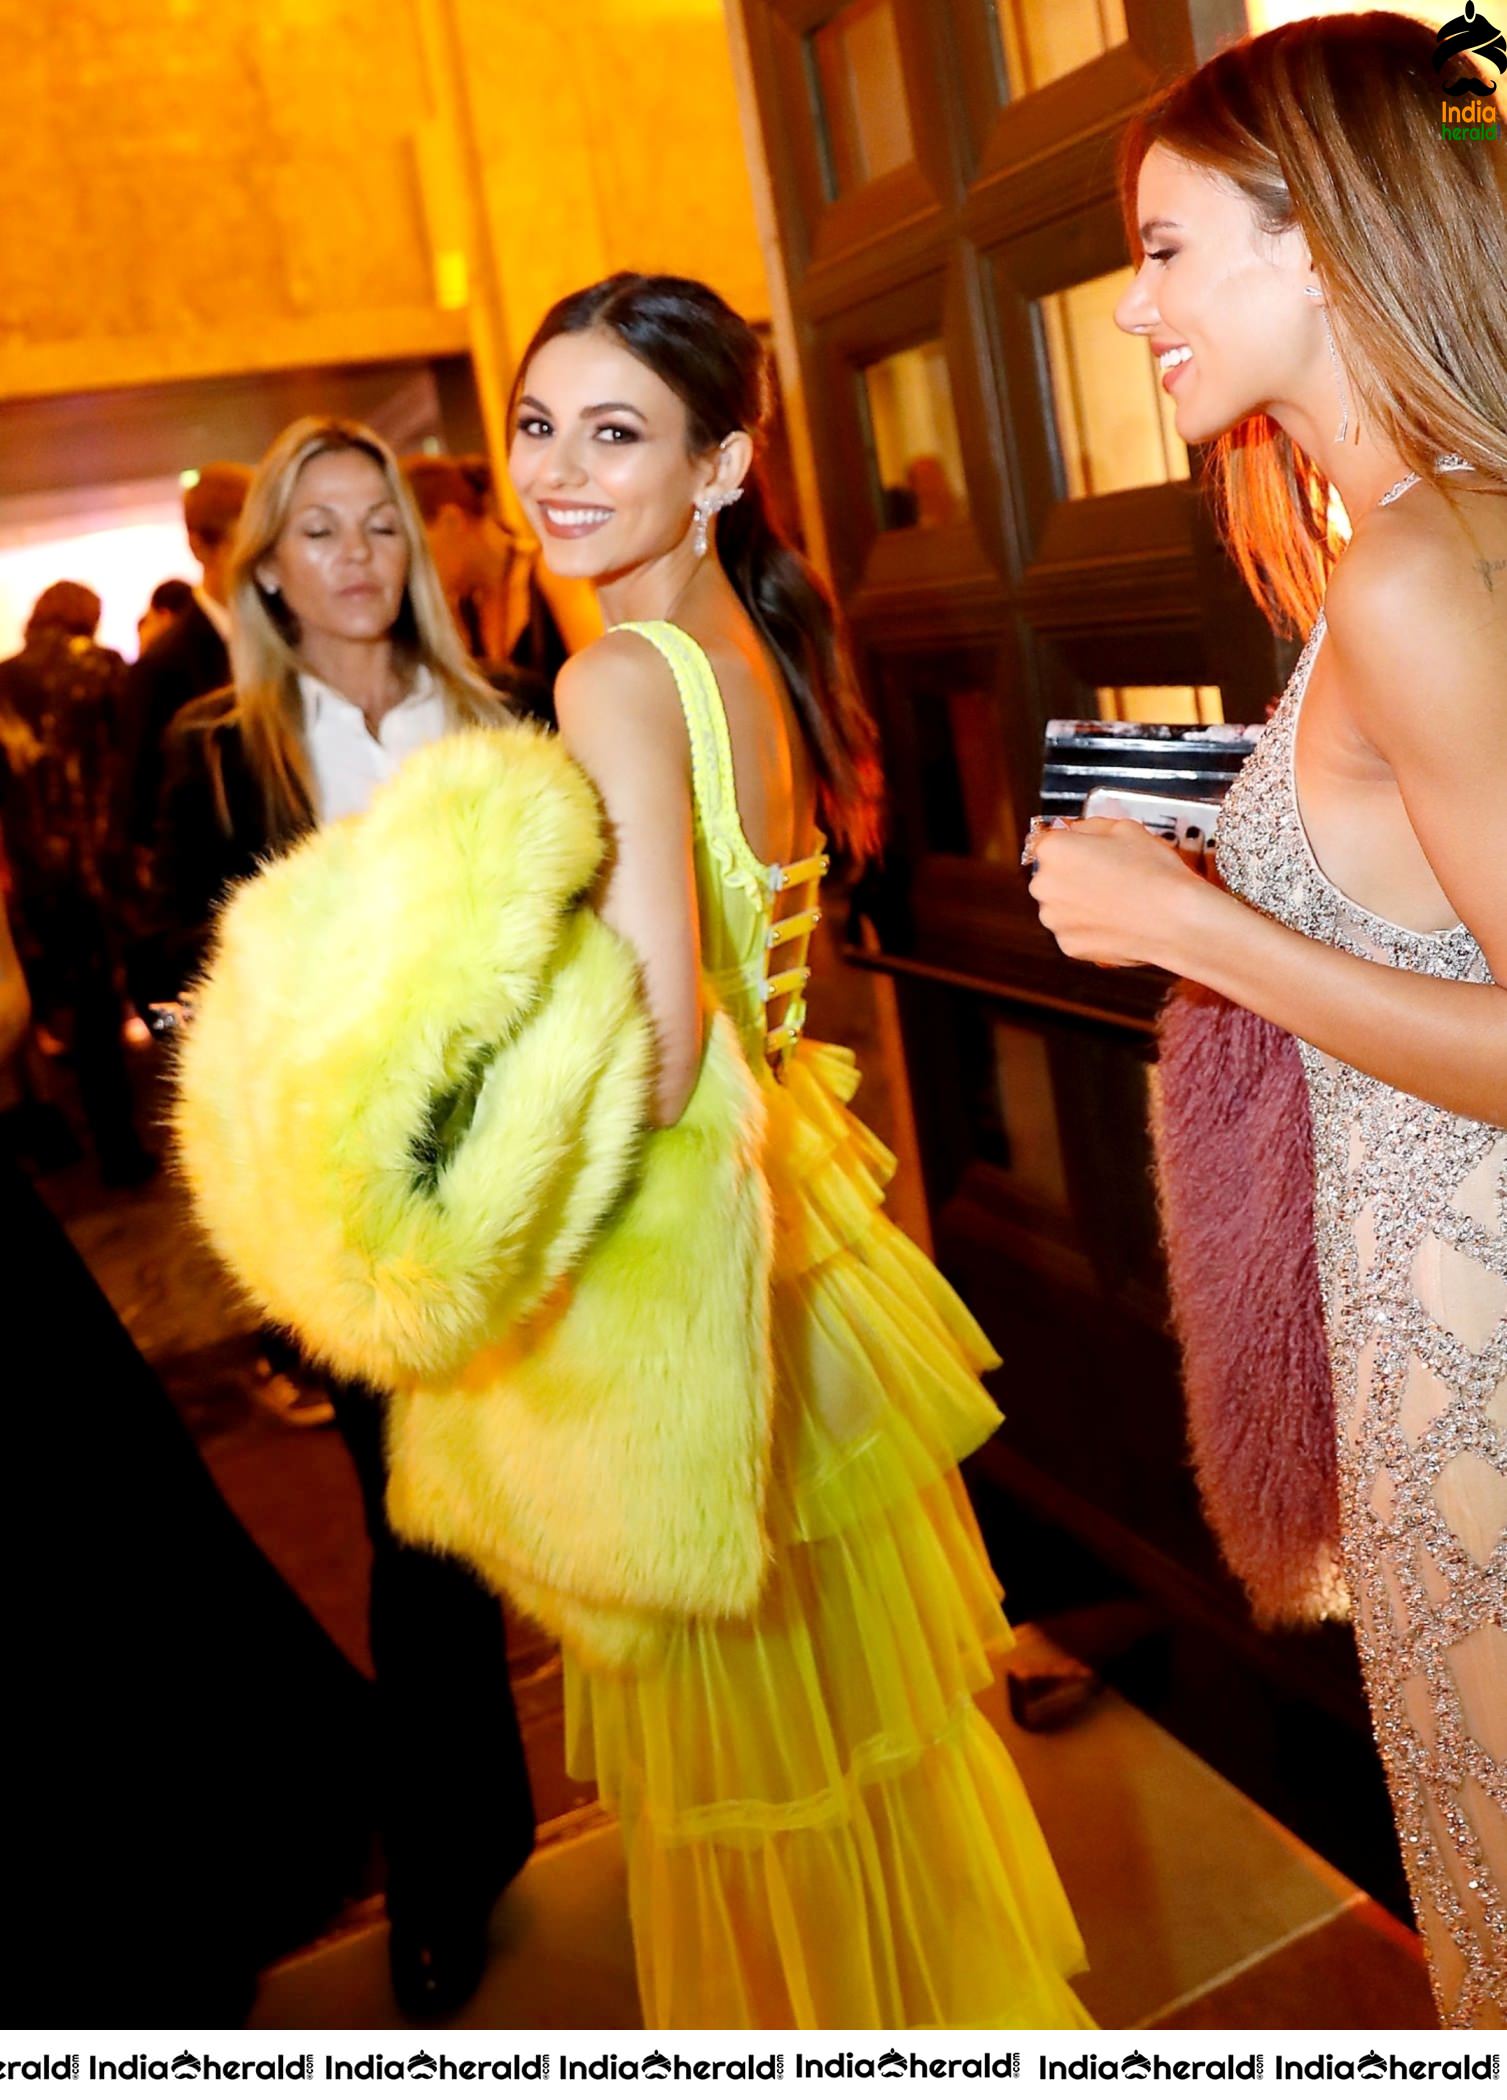 Victoria Justice Hot and Sexy in Yellow Dress at an Event Set 2